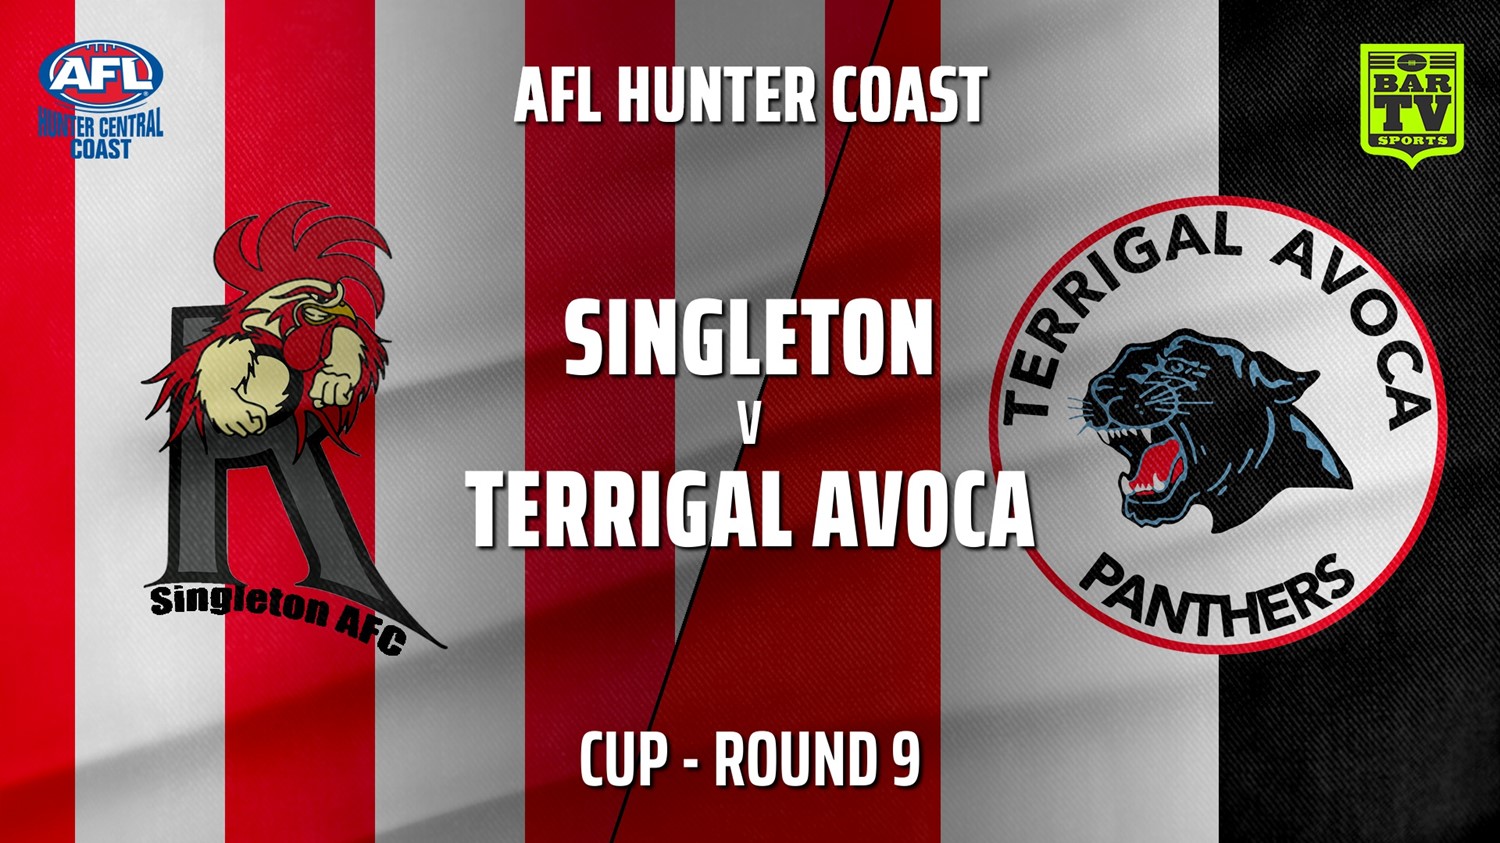 210619-AFL Hunter Central Coast Round 9 - Cup - Singleton Roosters v Terrigal Avoca Panthers Minigame Slate Image